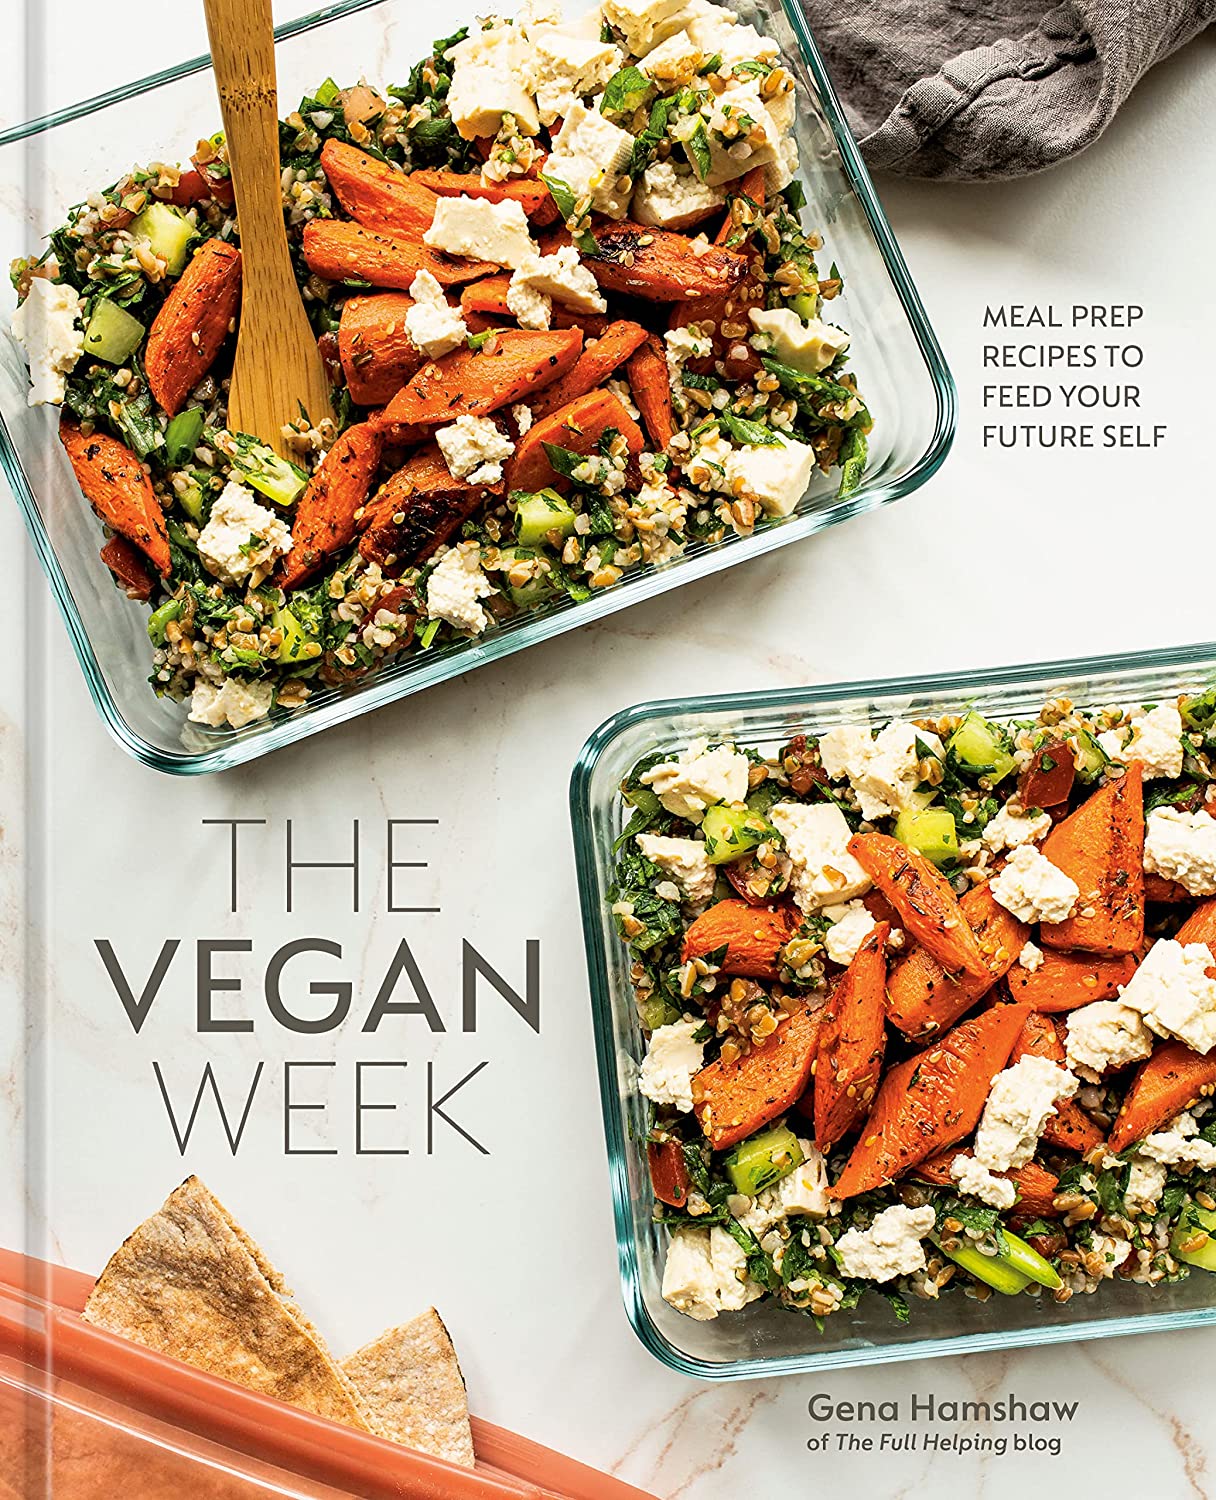 The Vegan Week: Meal Prep Recipes To Feed Your Future Self